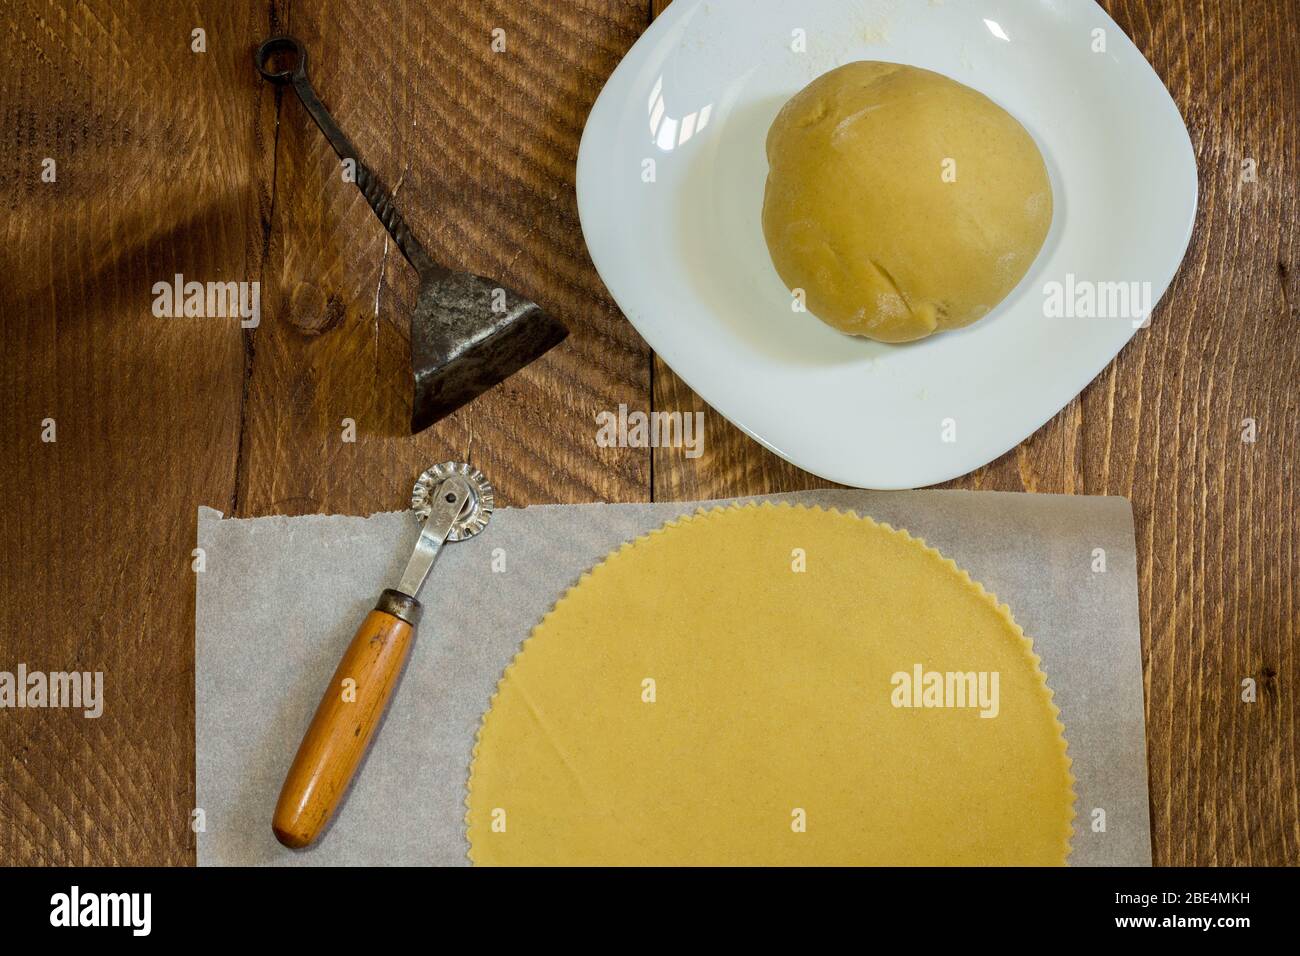 The image shows the pastry used for panzerotti filled with cheese and egg, a typical product of the Easter tradition of Campania. On wooden background Stock Photo